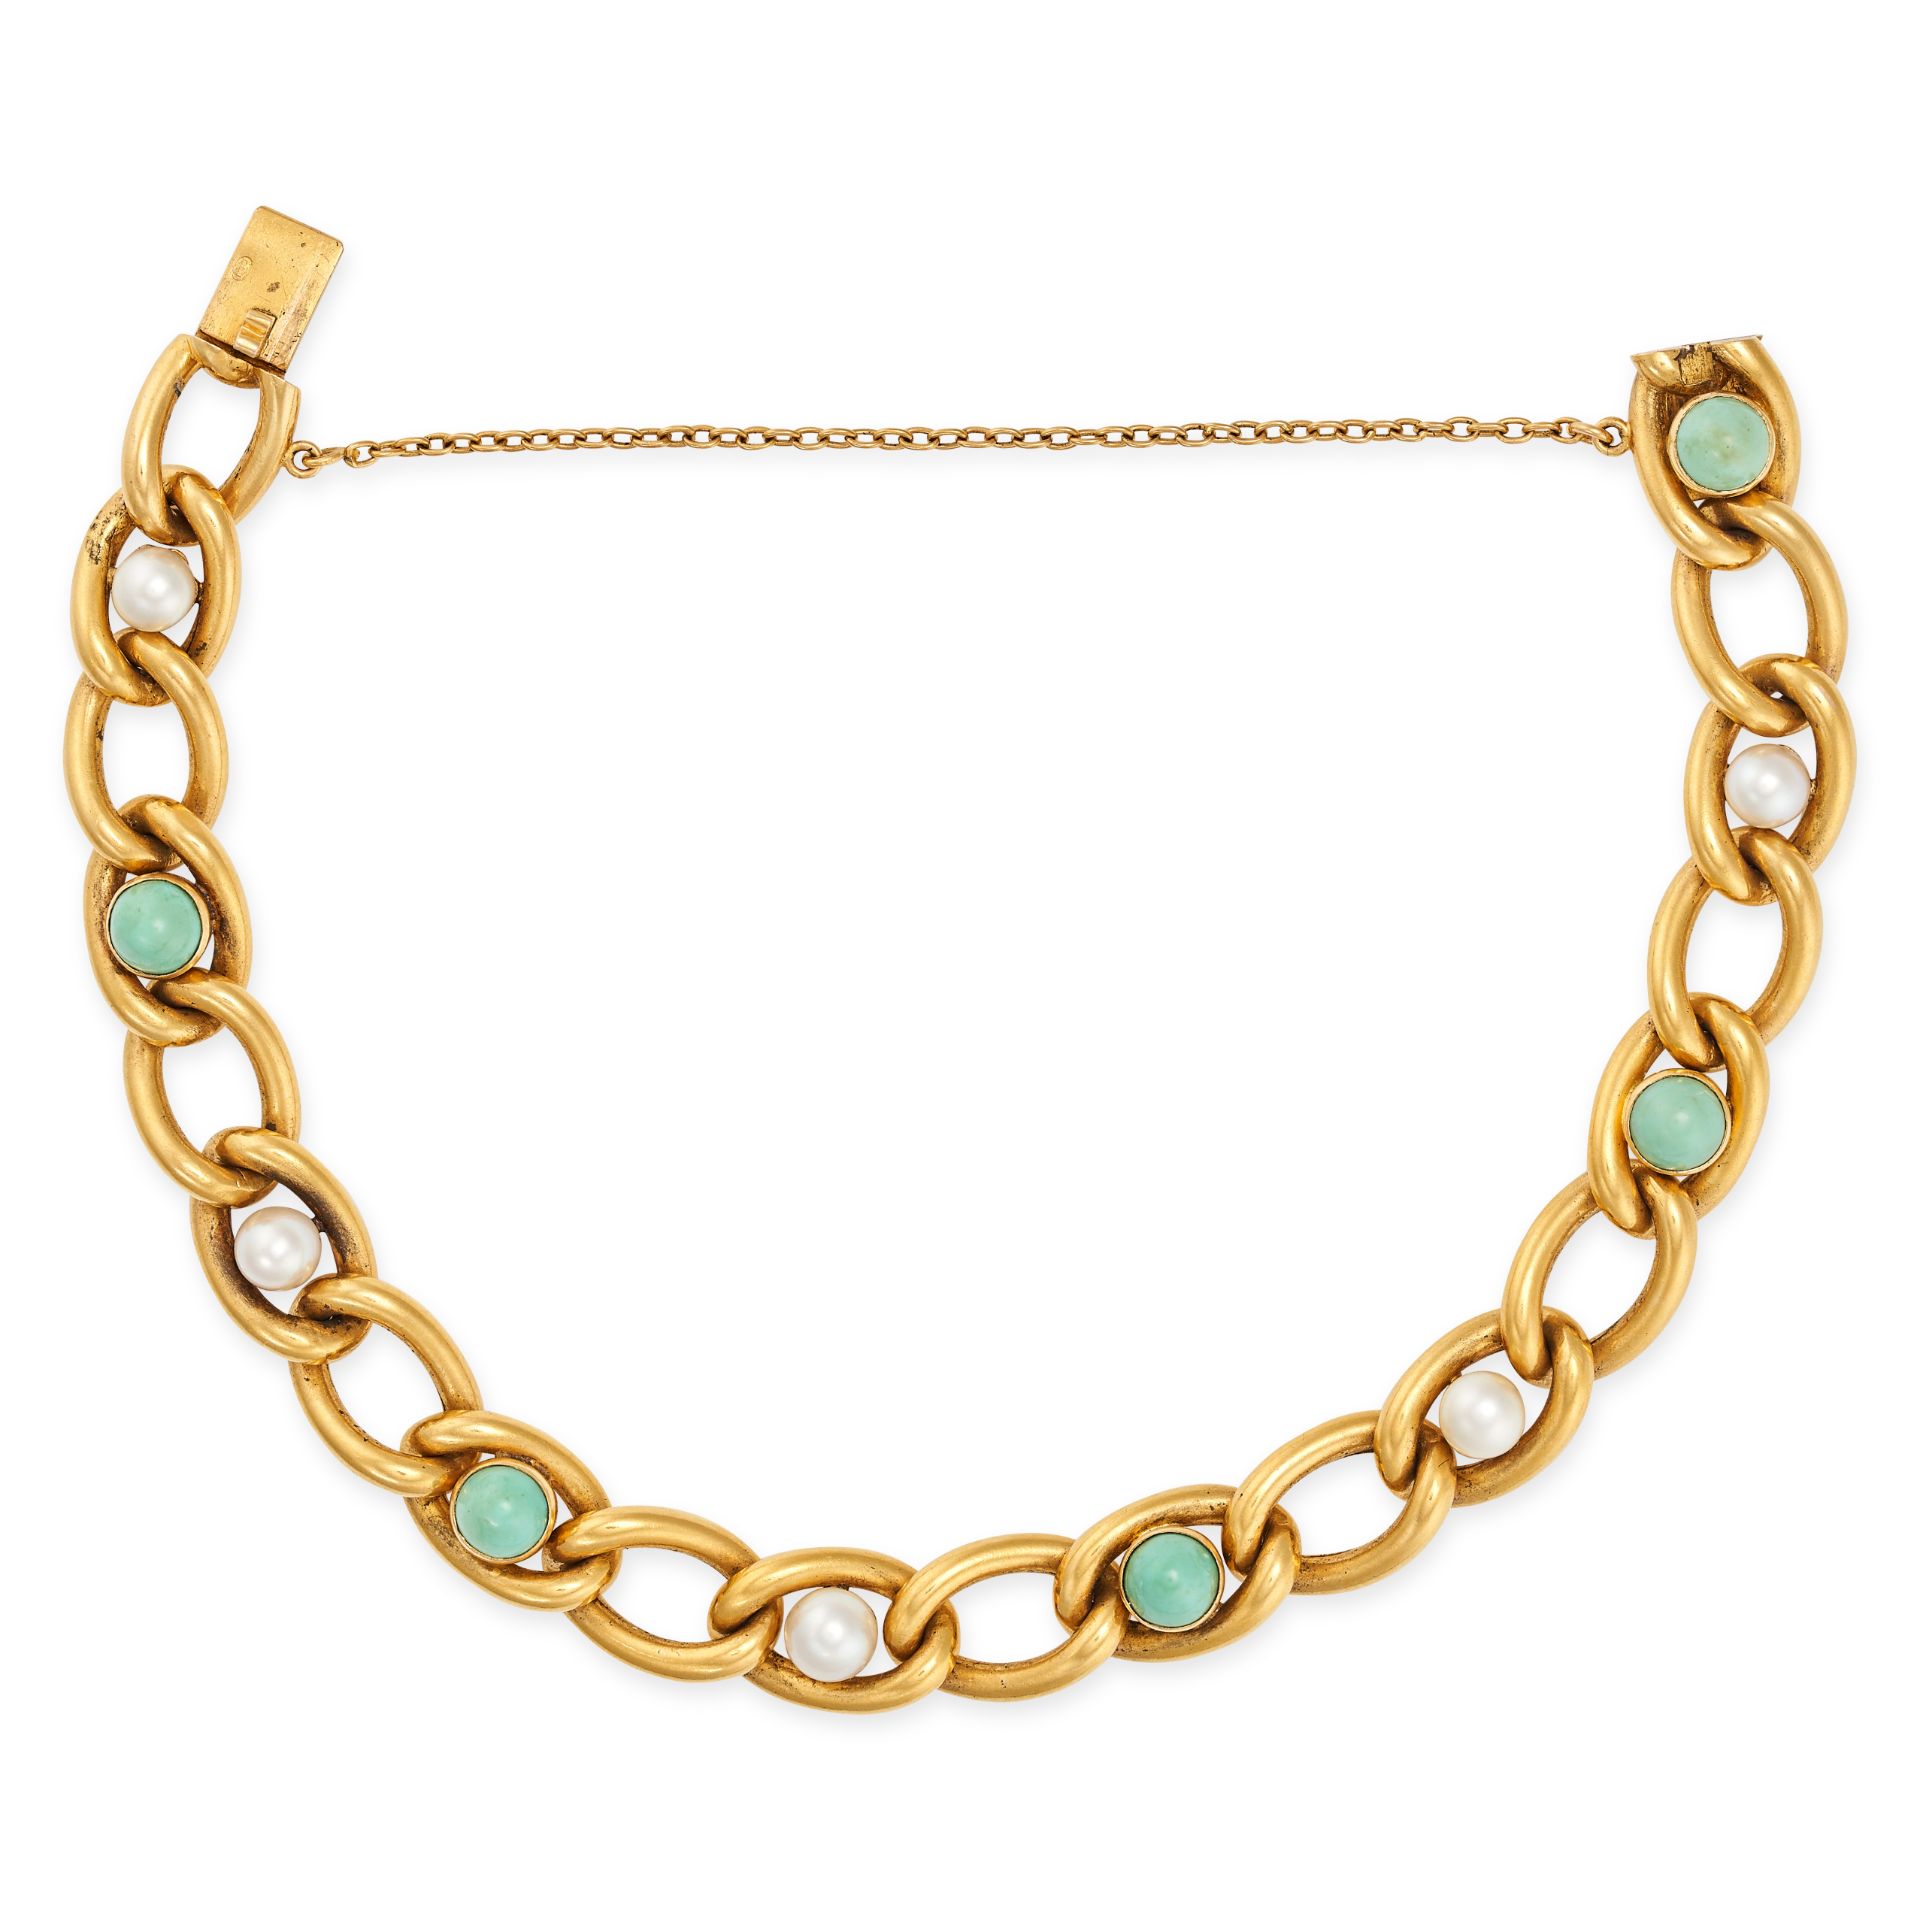 A VINTAGE TURQUOISE AND PEARL CURB LINK BRACELET in 18ct yellow gold, comprising a row of curb li...